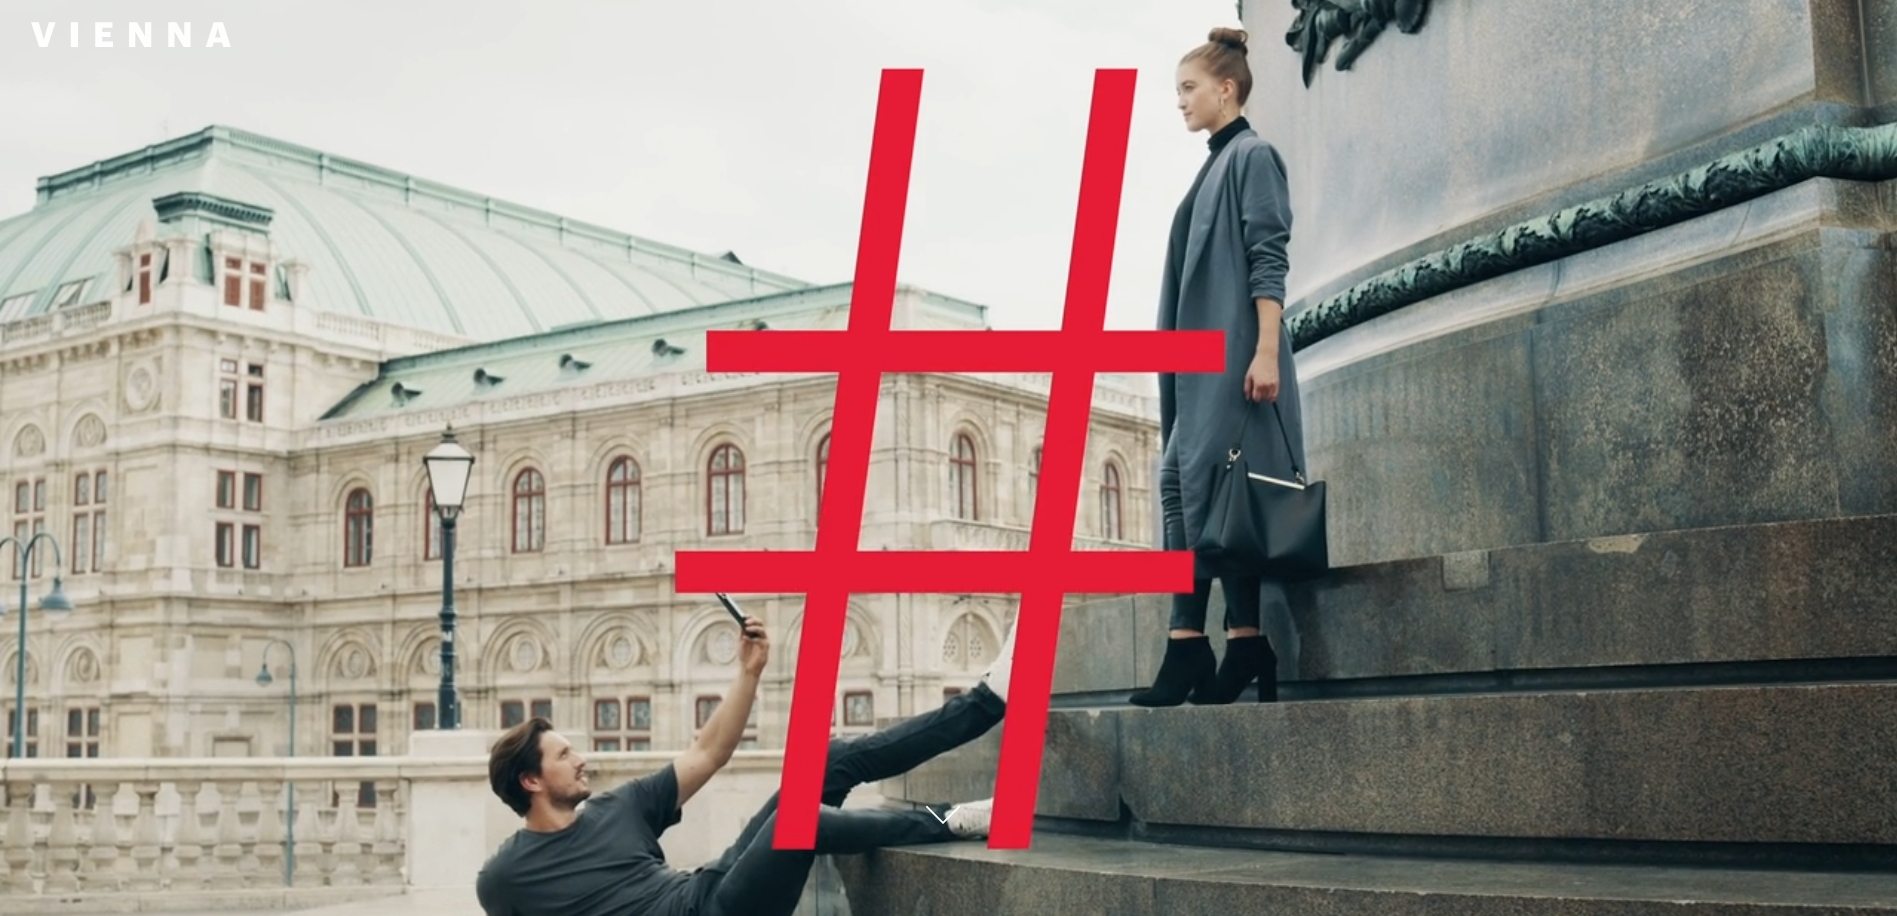 Unhashtag Vienna- Vienna Tourist Board obscured the world best-known artwork with a giant red hashtag